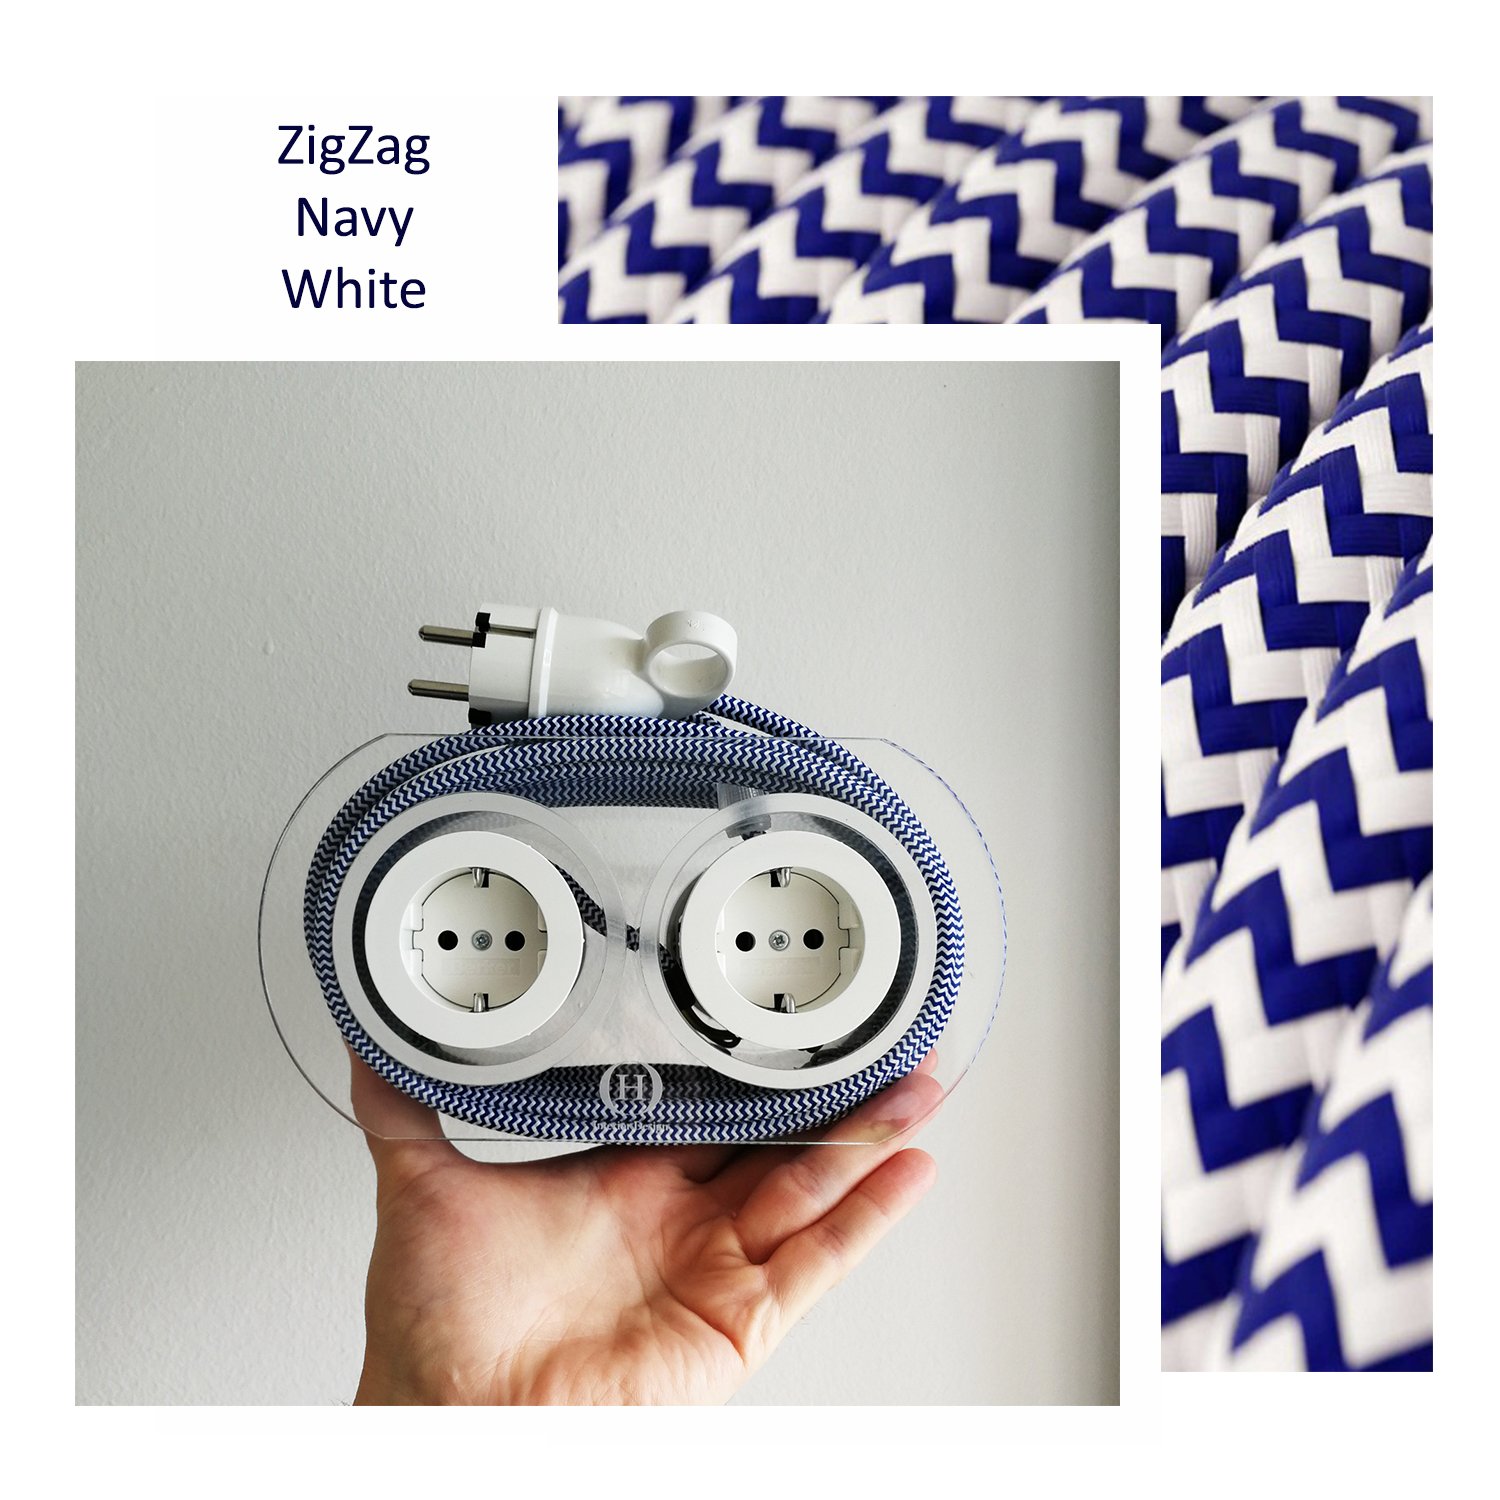 Extension Cord for 4 Plugs_ZigZag Navy & White.jpg